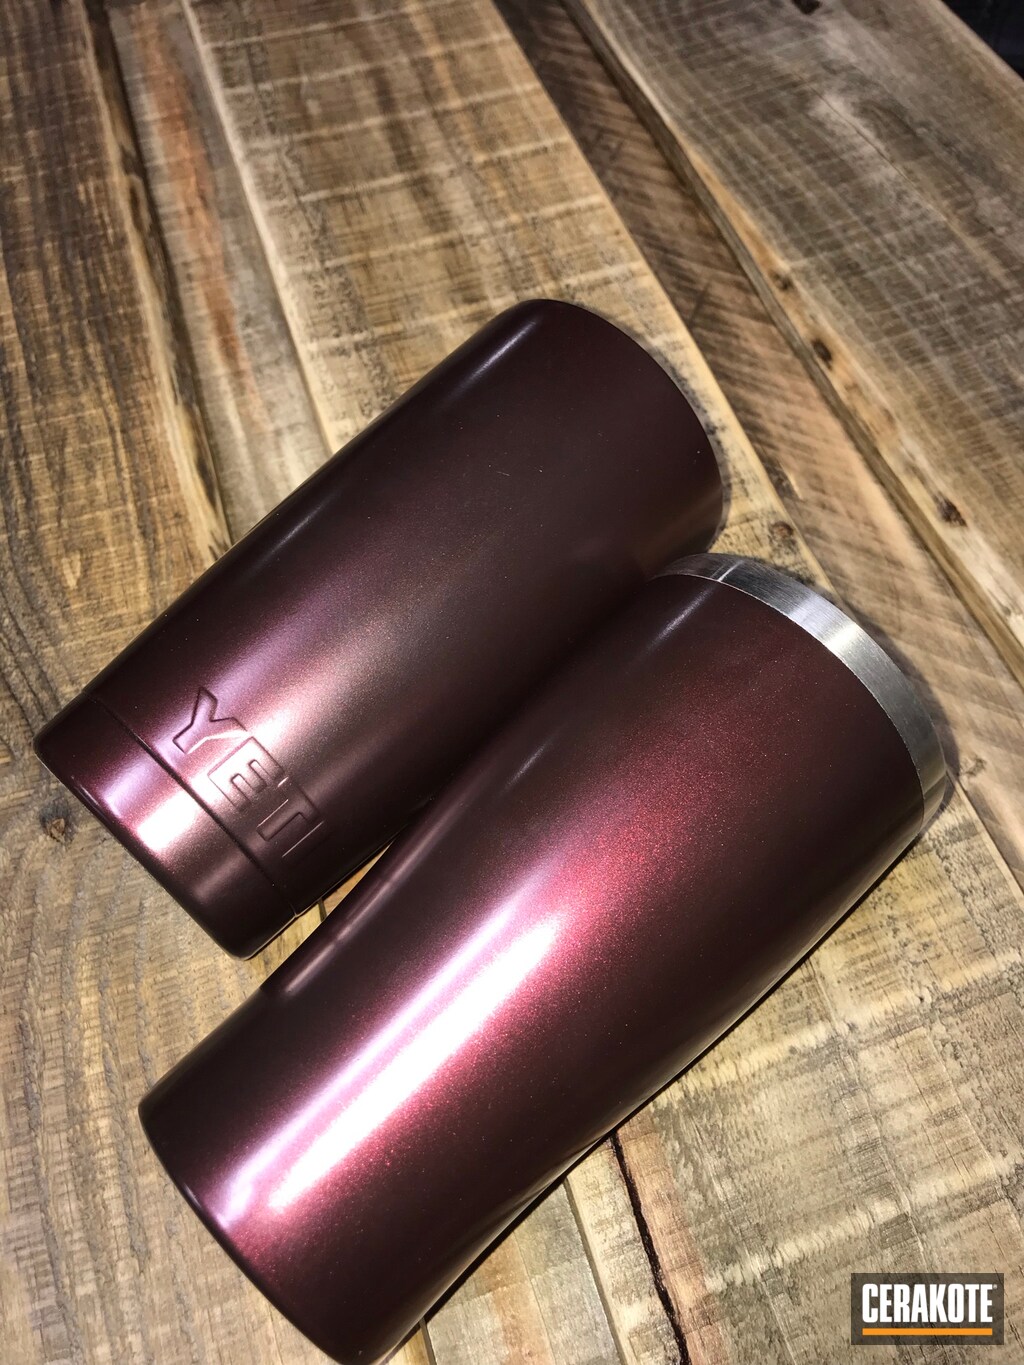 https://images.nicindustries.com/cerakote/projects/72765/cerakoted-custom-cups-in-h-146.jpg?1635784219&size=1024